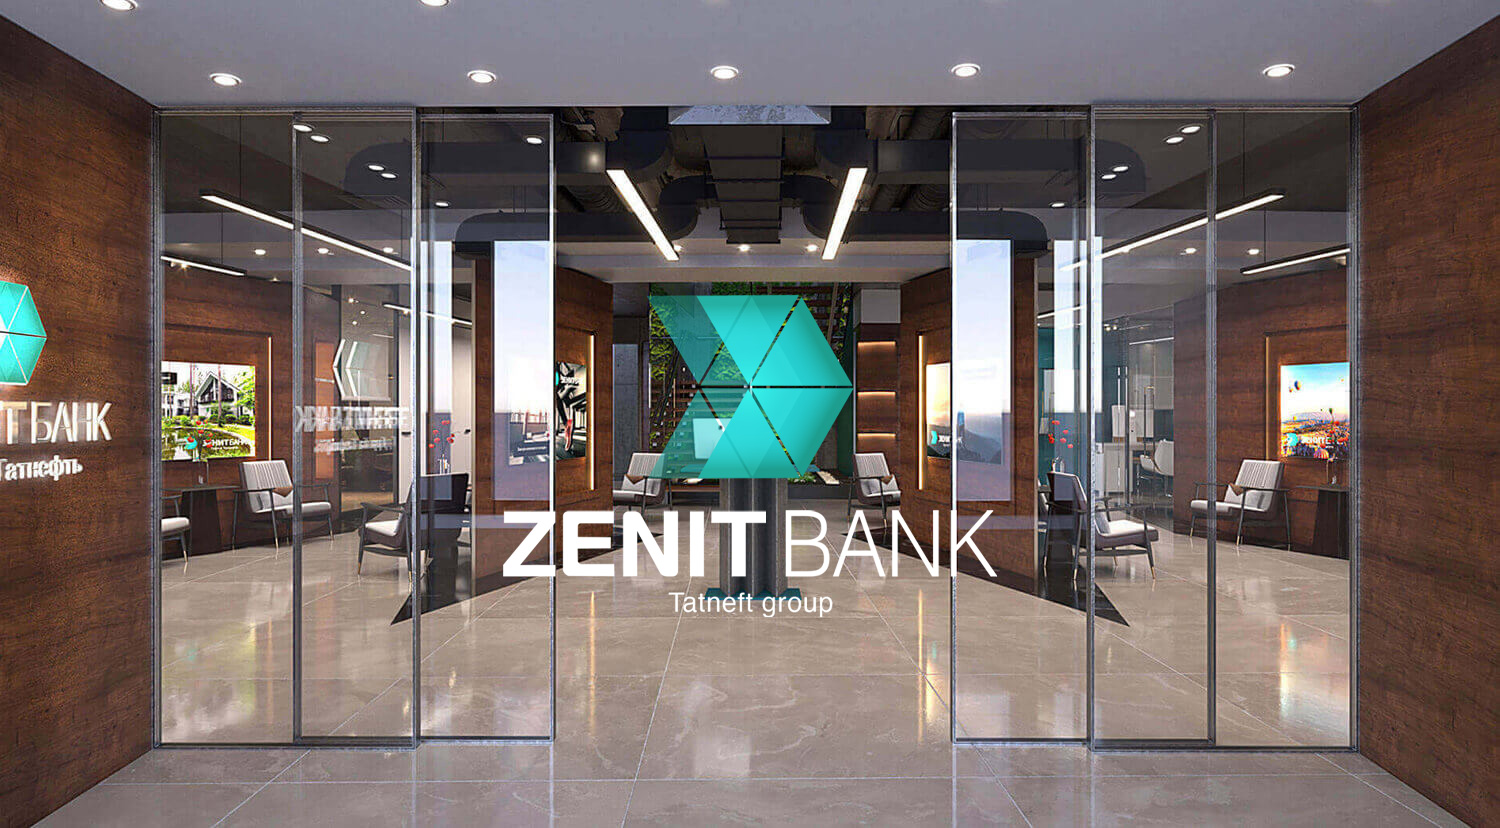 Zenit Bank Russia, Entrance to banking hall. Brand Identity and interior design - Campbell Rigg Agency